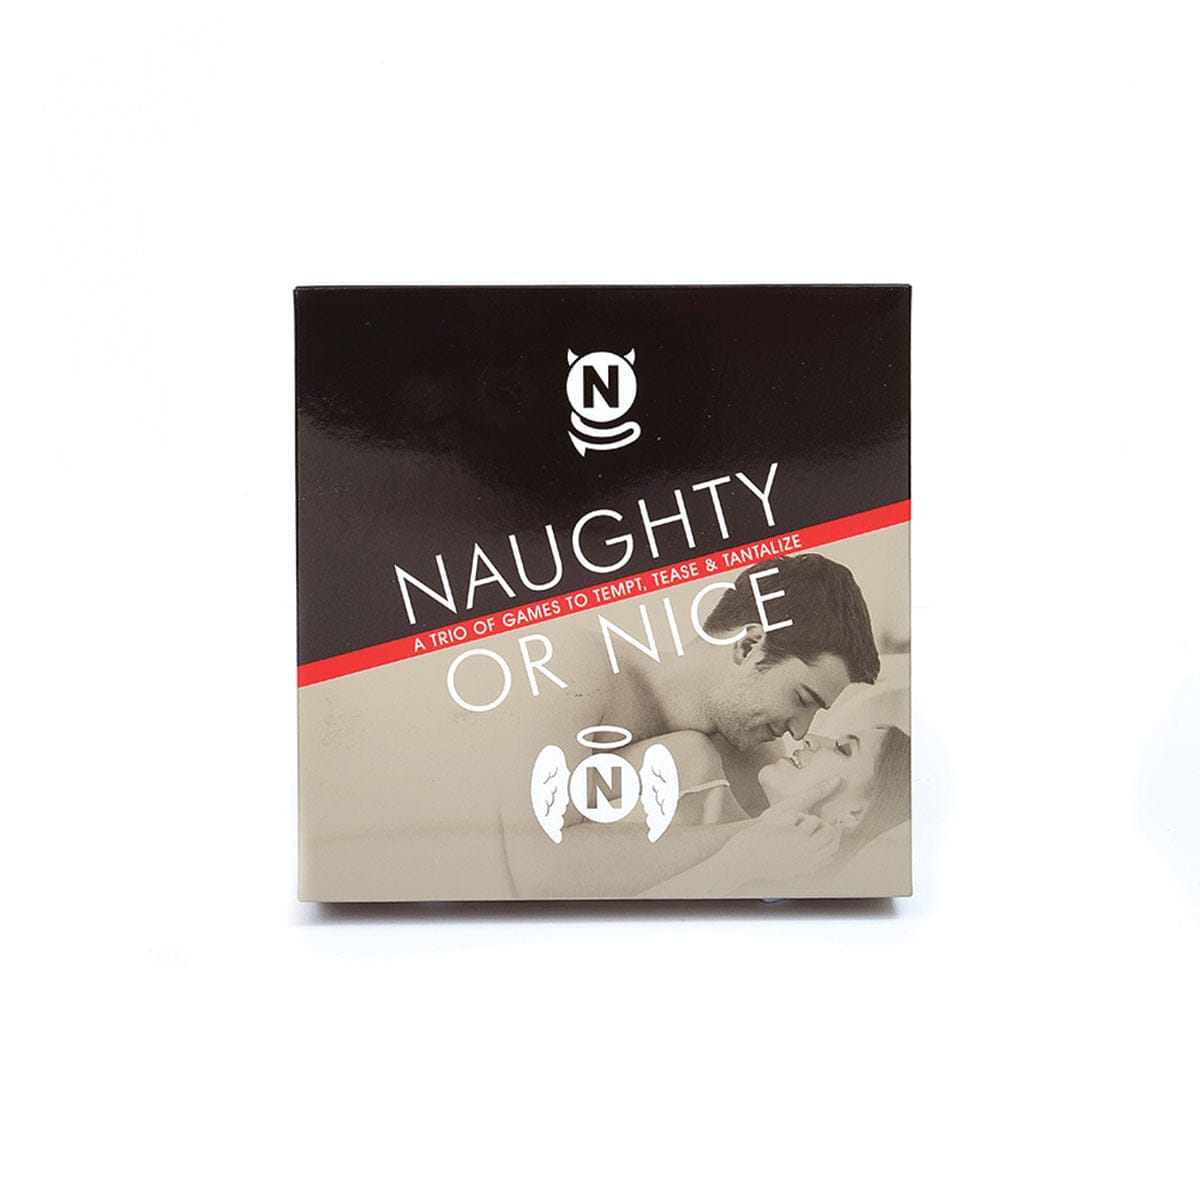 Naughty or Nice - A Trio of Games to Tempt, Tease & Tantalize - Rolik®